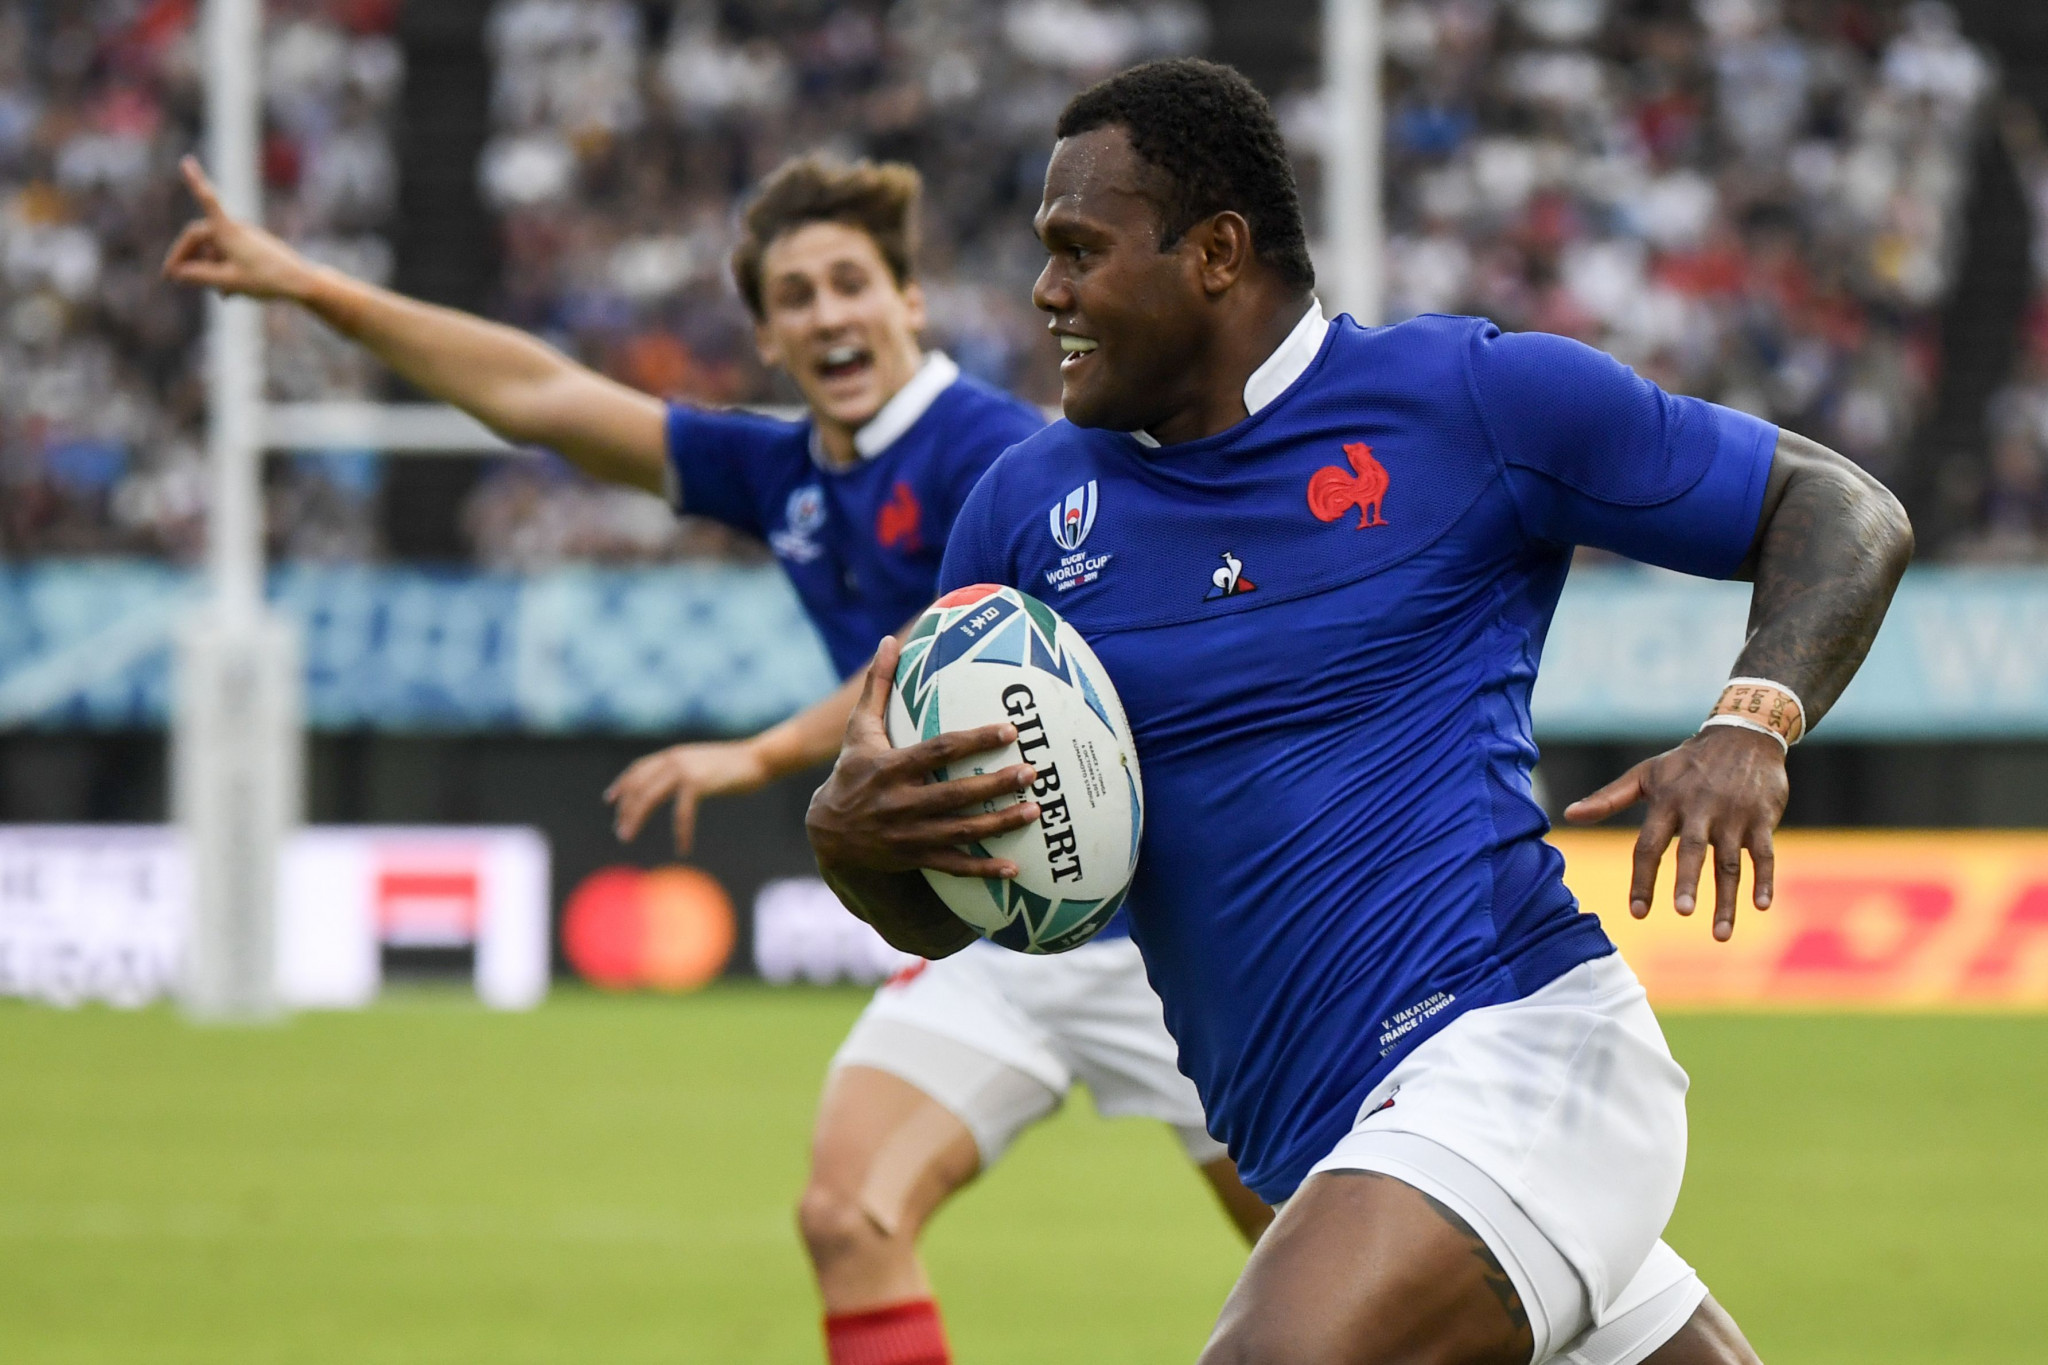 Virimi Vakatawa crossed for France as they initially took control against Tonga ©Getty Images